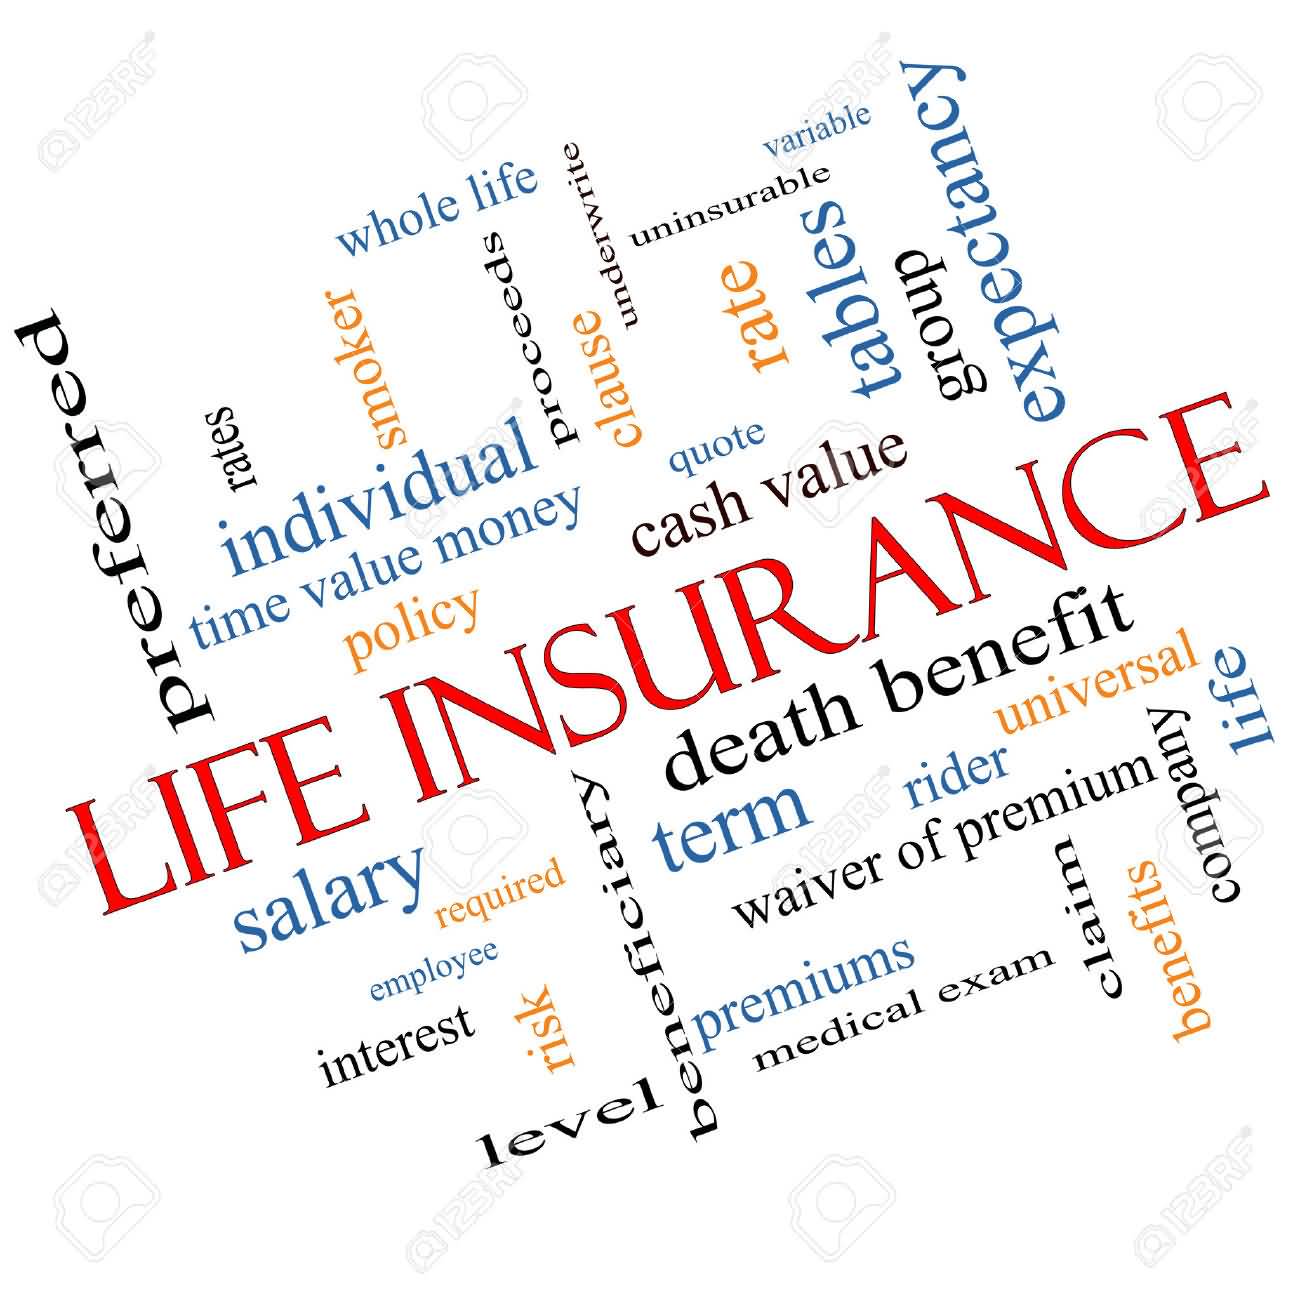 20 Quote Whole Life Insurance Images and Pictures